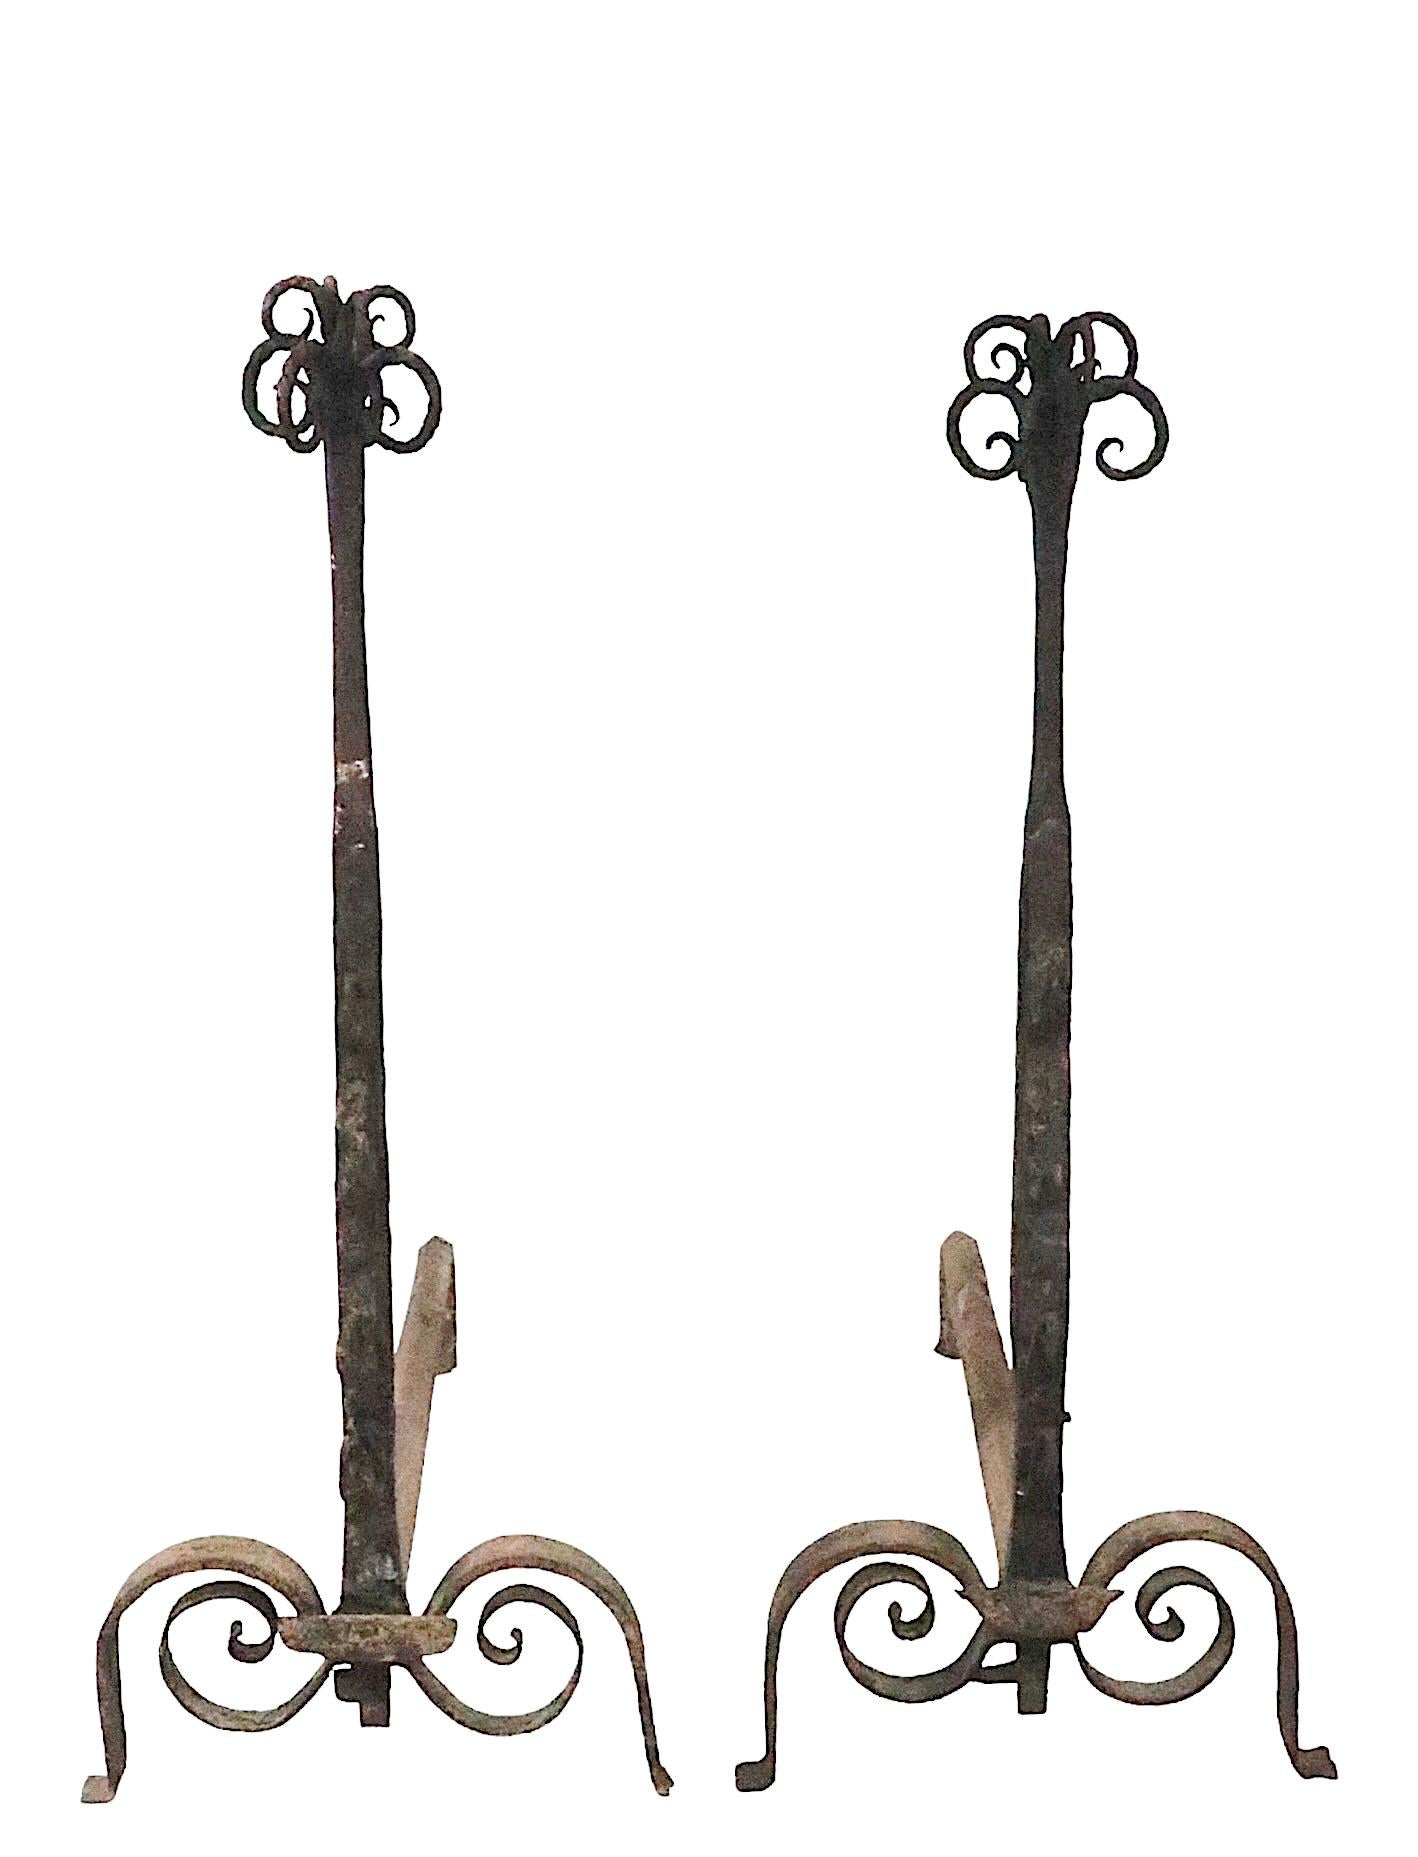 Great pair of hand forged iron andirons, probably Continental.possibly French in origin, early 19th C or 18th C vintage. The andirons feature an organic plant like top with twisted metal curlicue form elements, the vertical shafts have wrought hooks